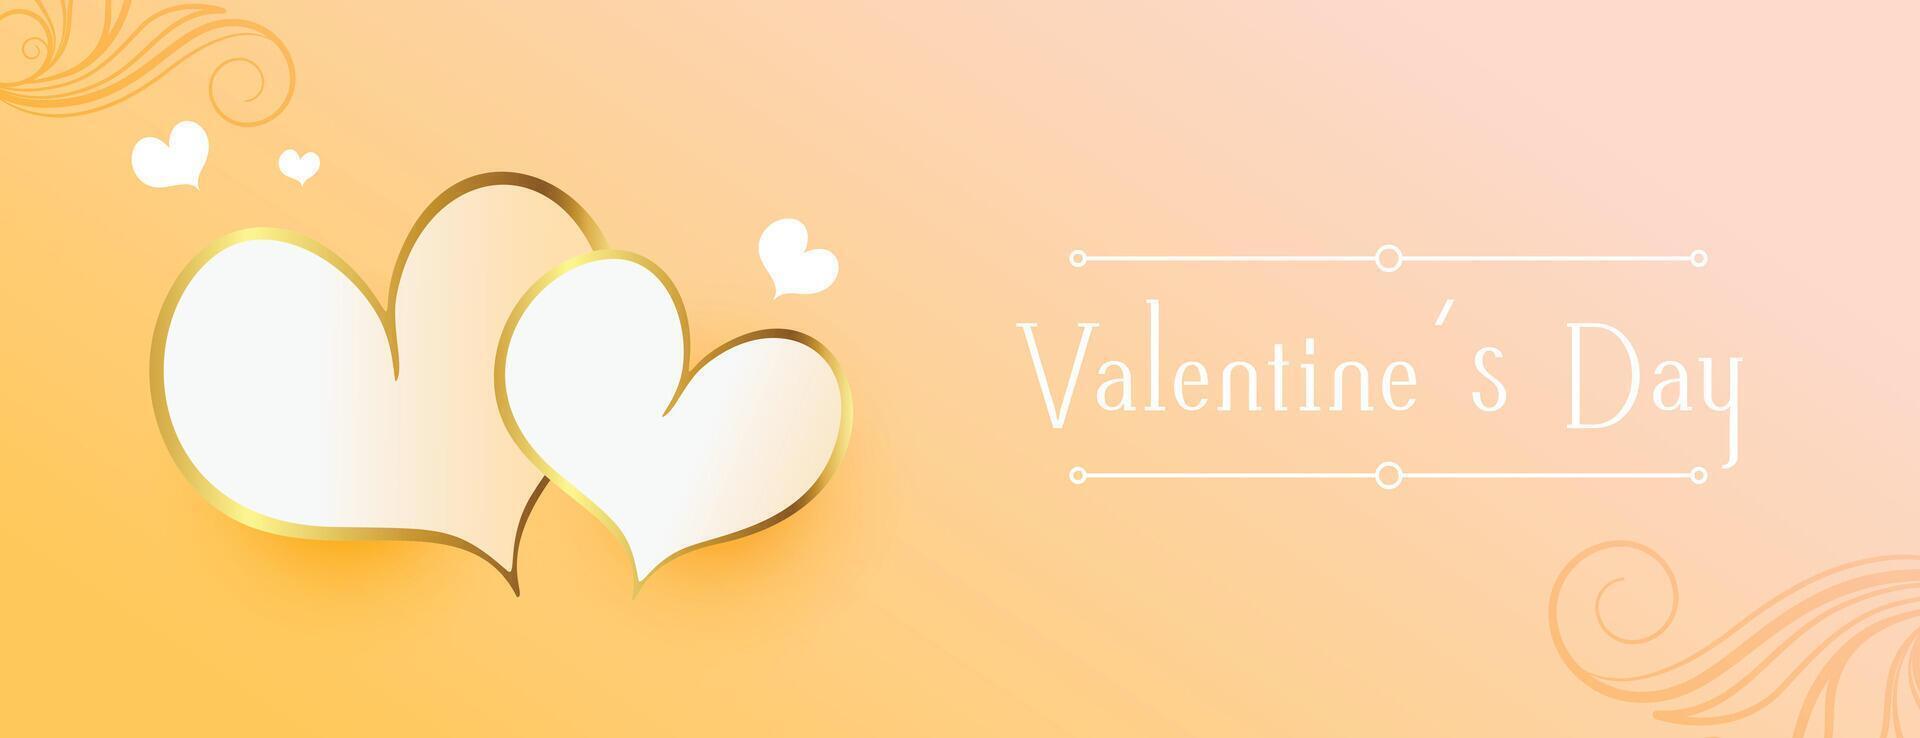 valentines day cute hearts banner design vector